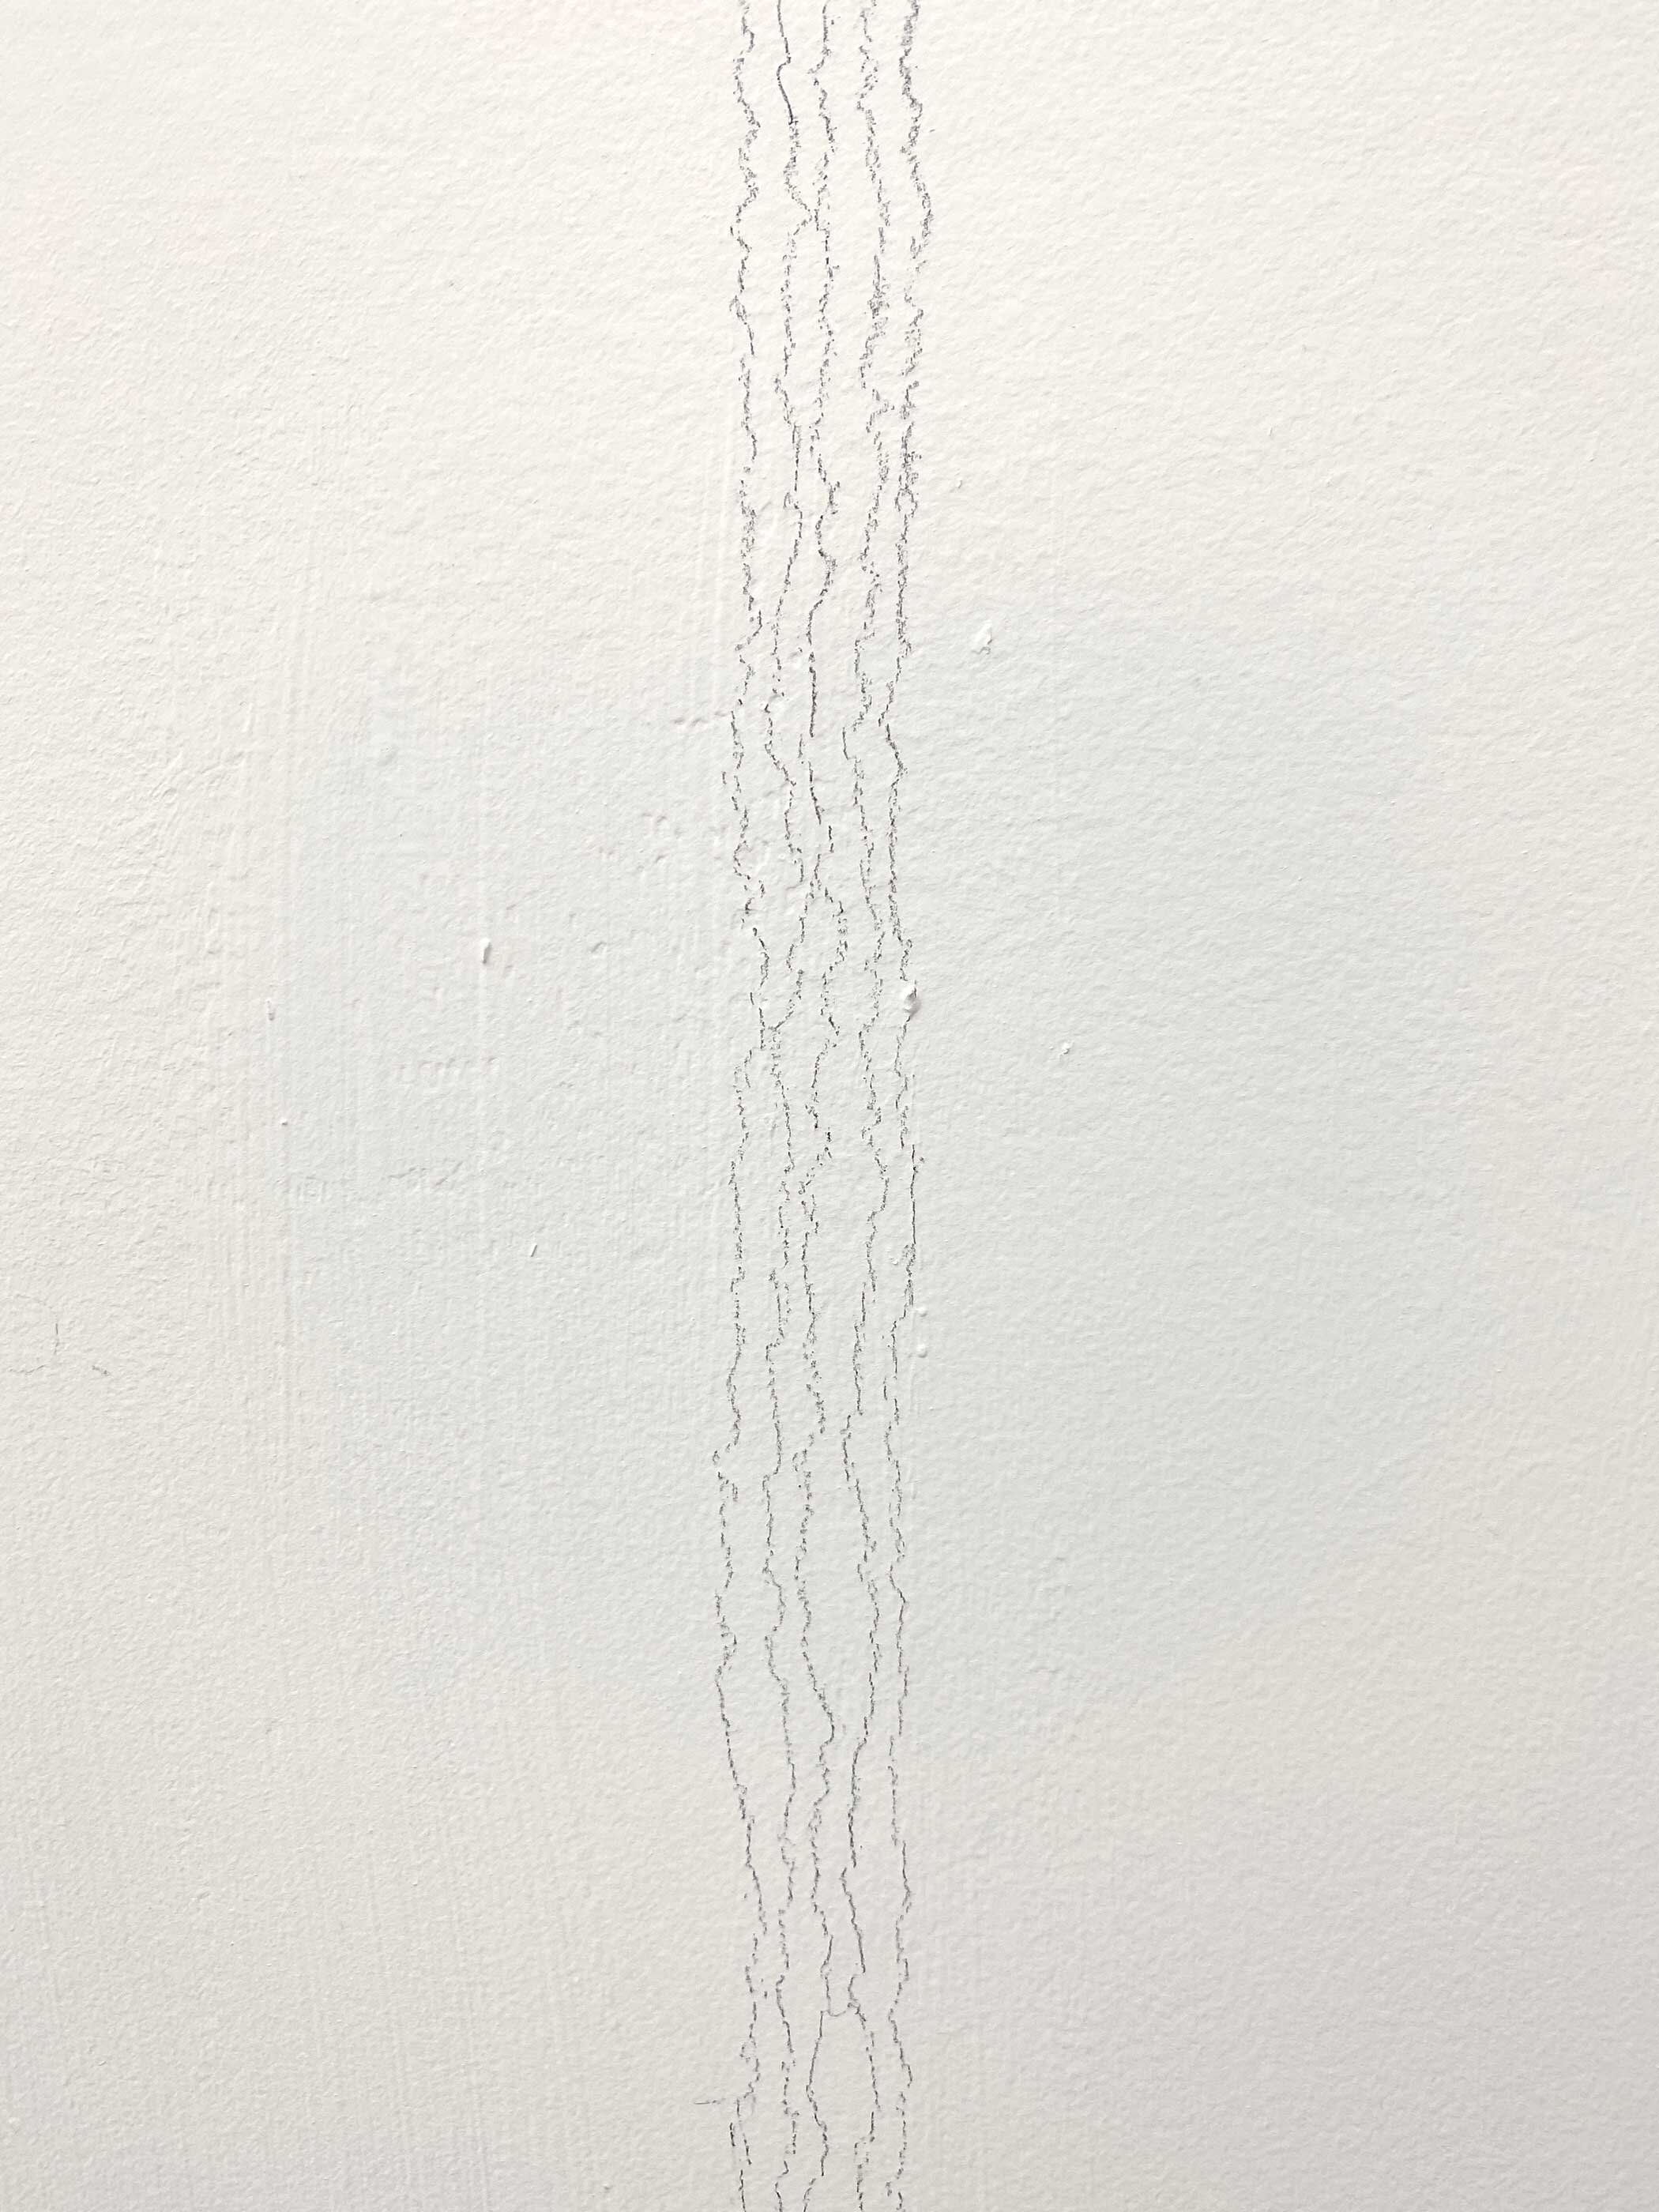  Detail of  Living Room: Actual Scale   Coloured pencil on wall  2020   